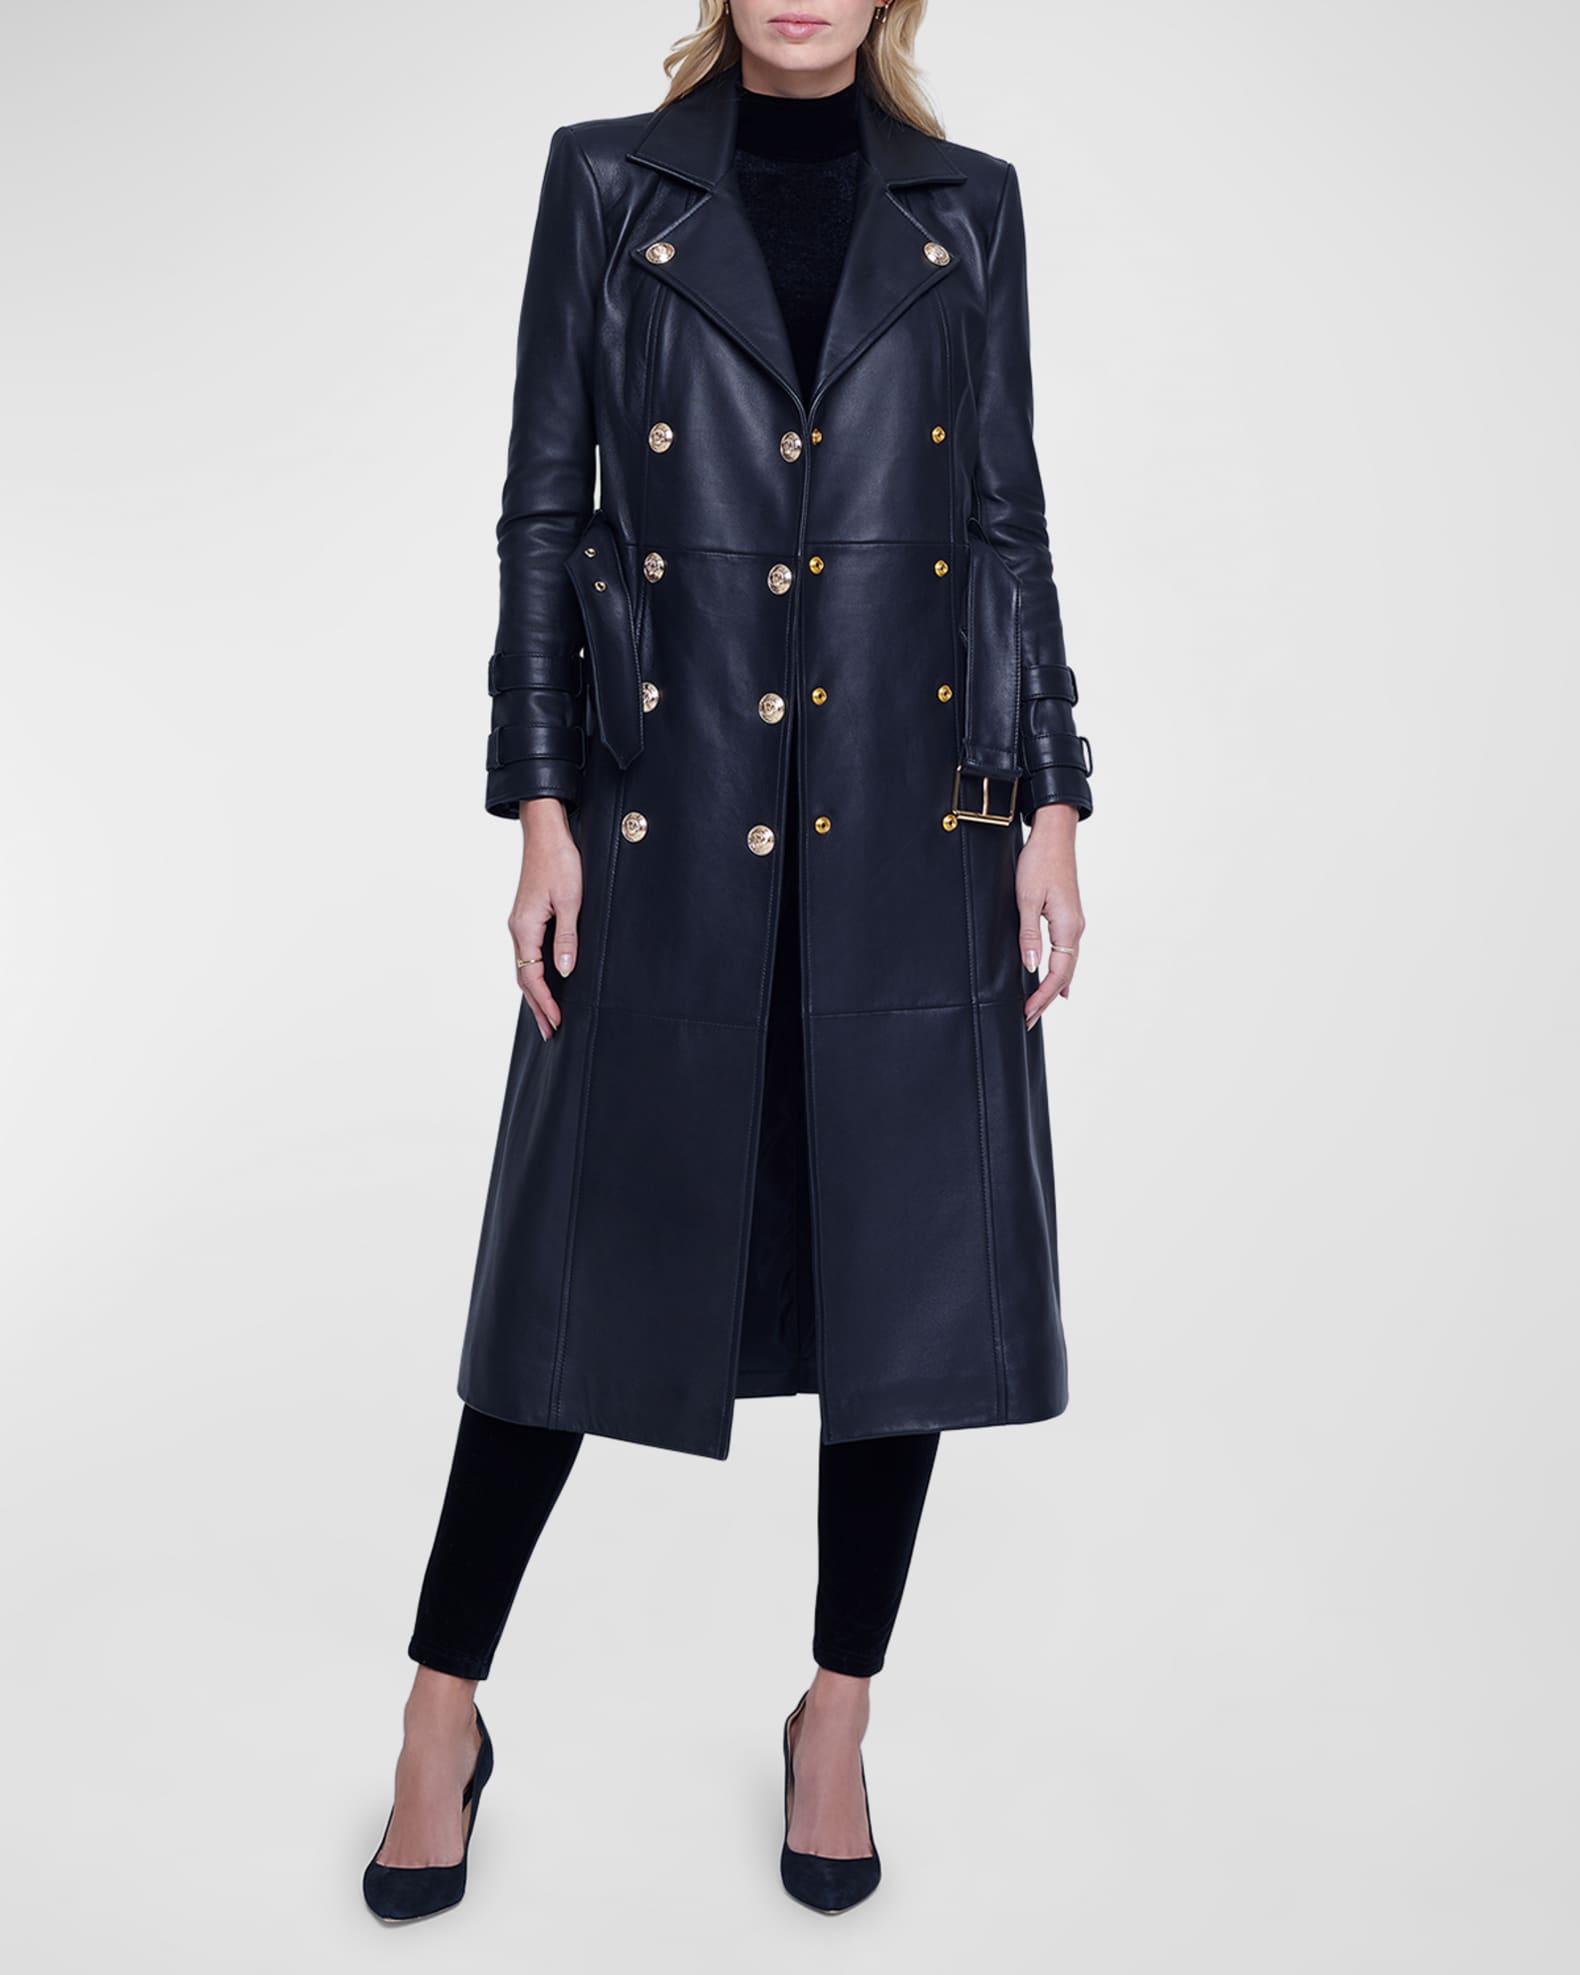 L'Agence Celina Leather Trench Coat | Neiman Marcus